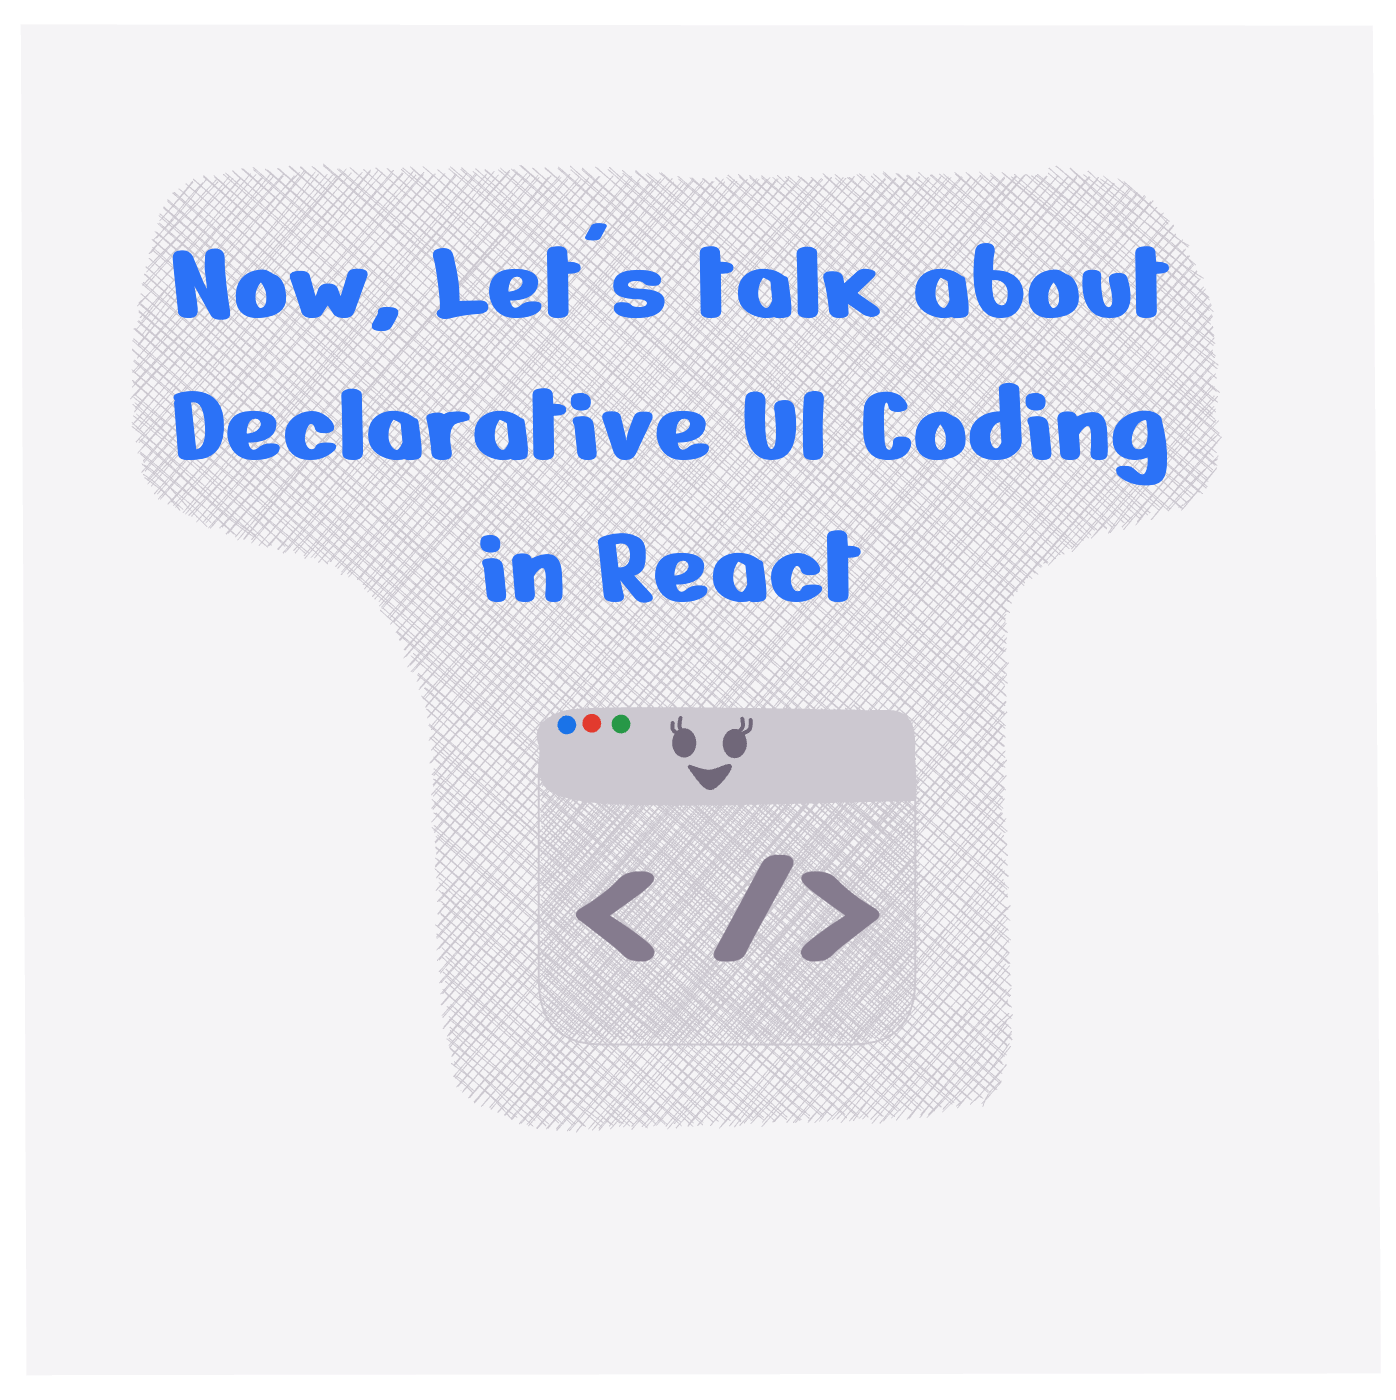 Now, Let's talk about Declarative UI Coding in React